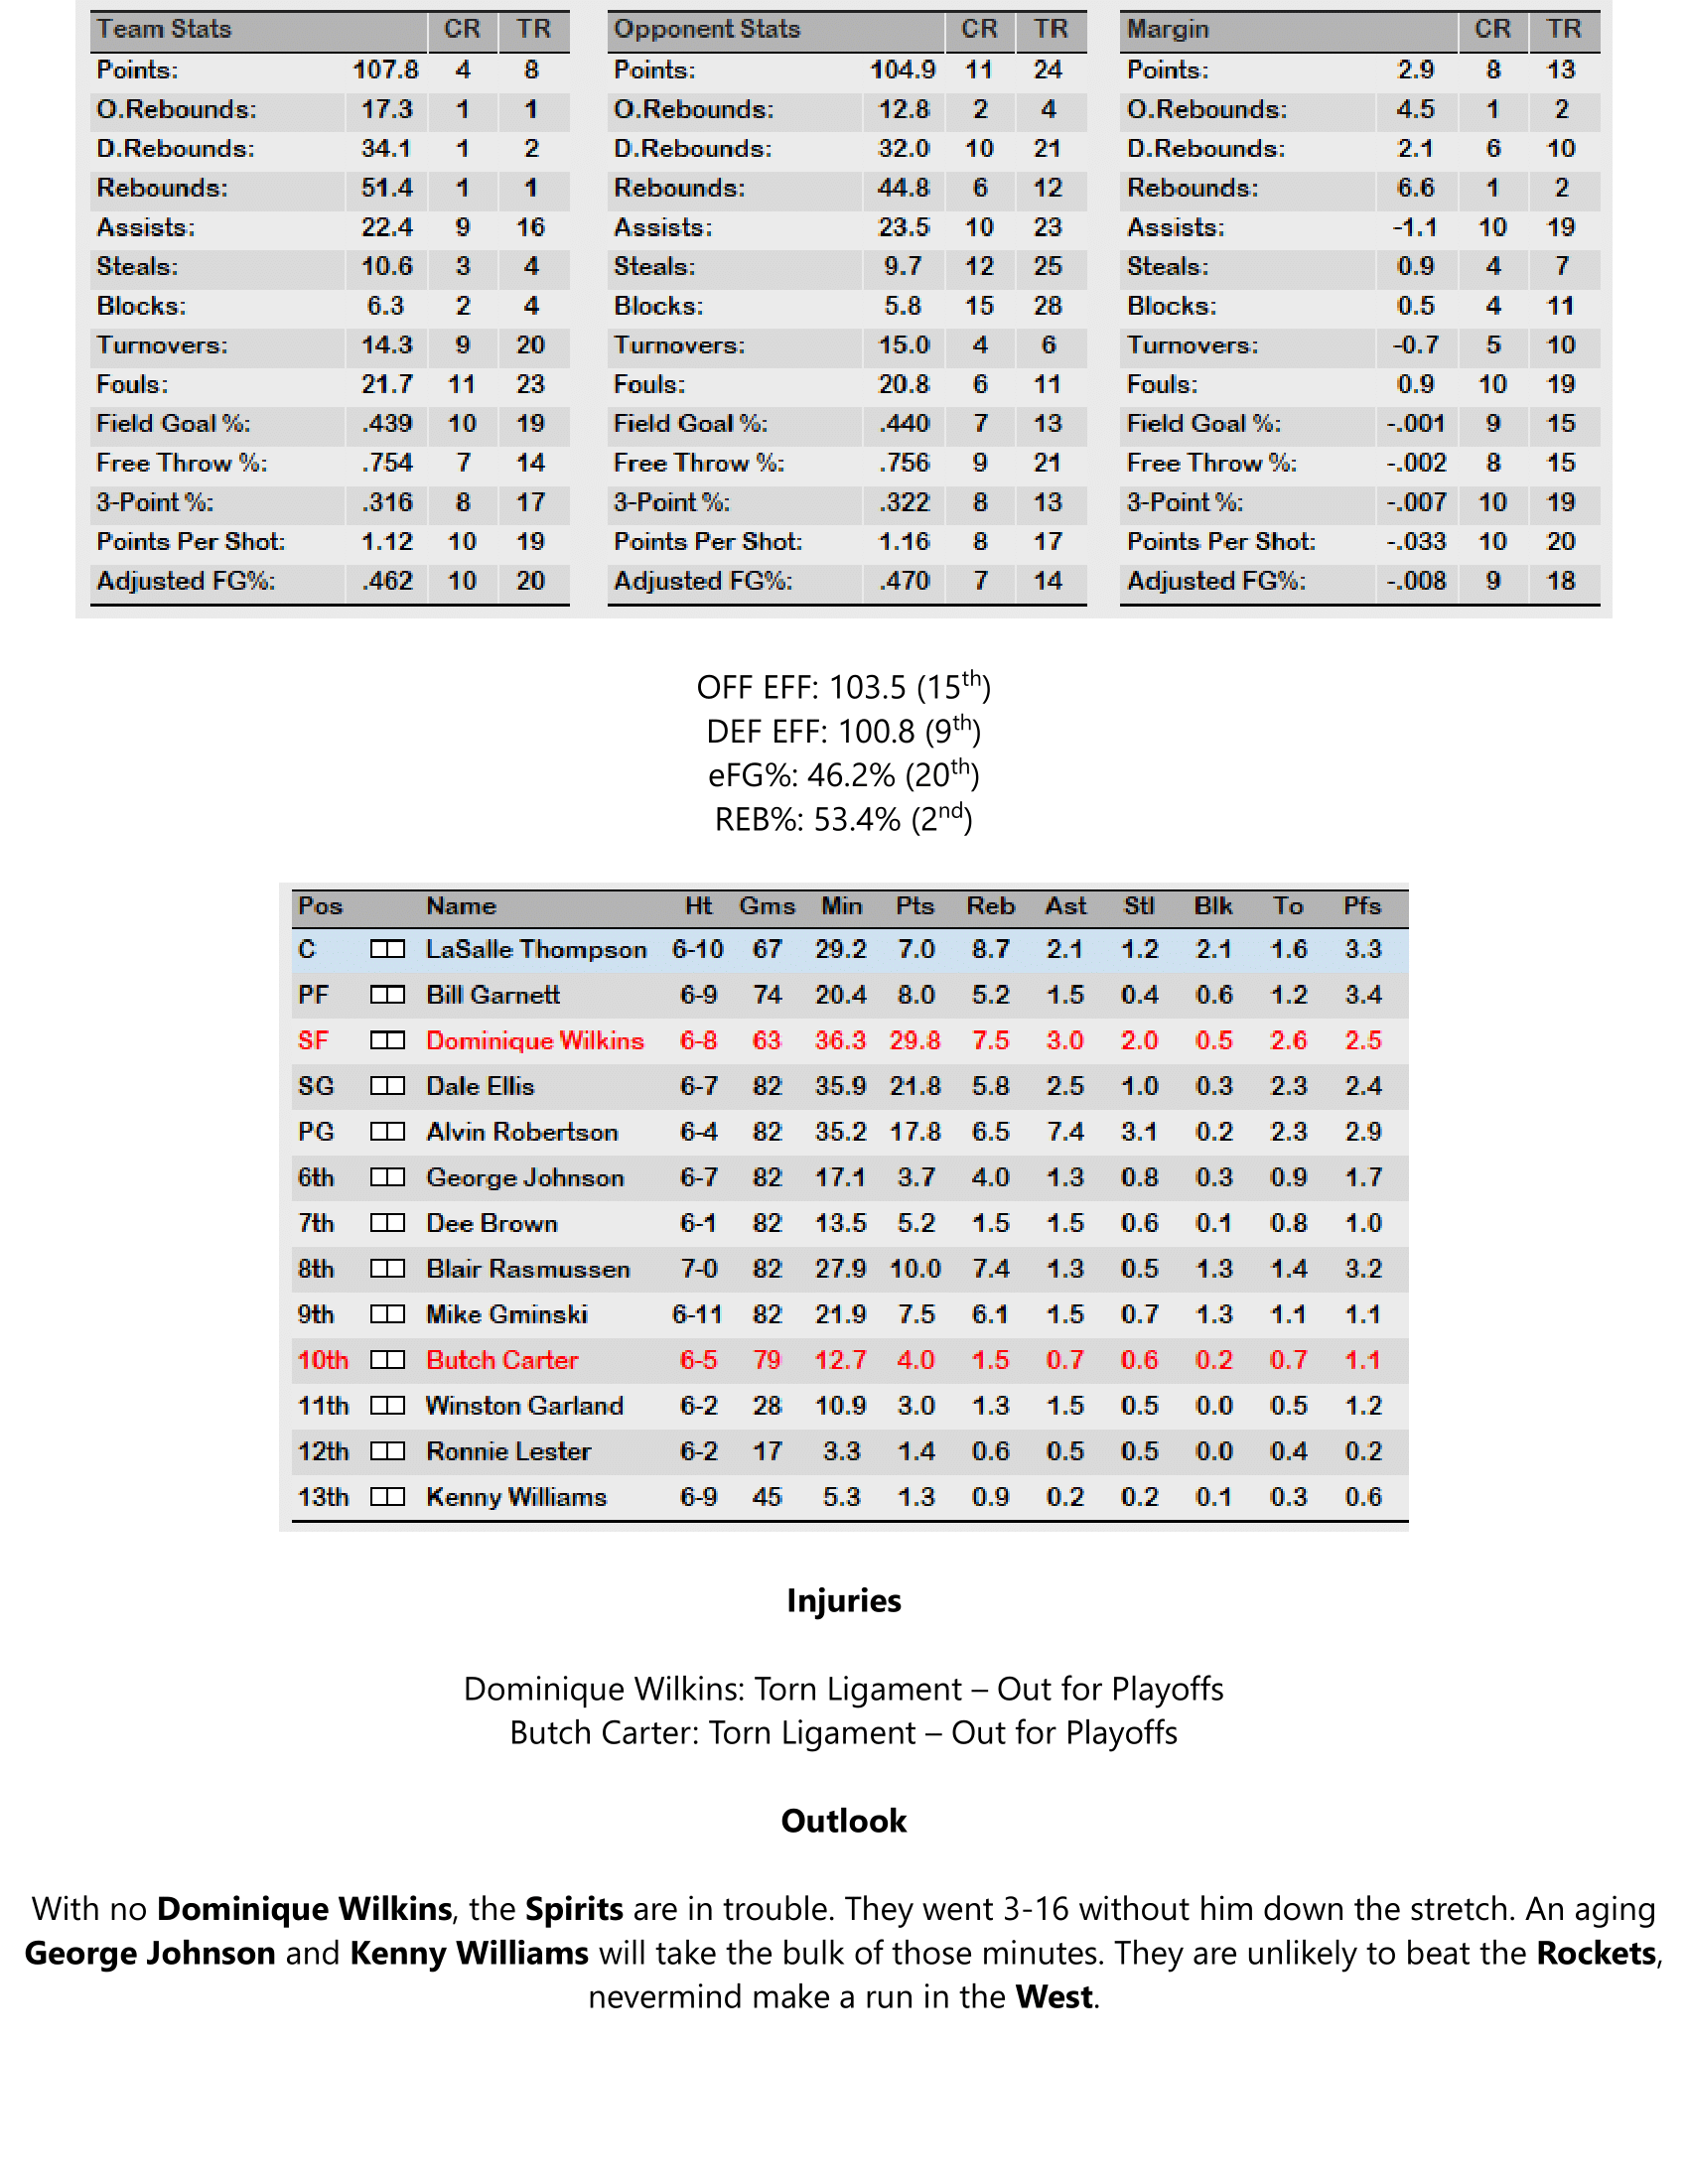 91-92-Part-4-Playoff-Preview-11.png